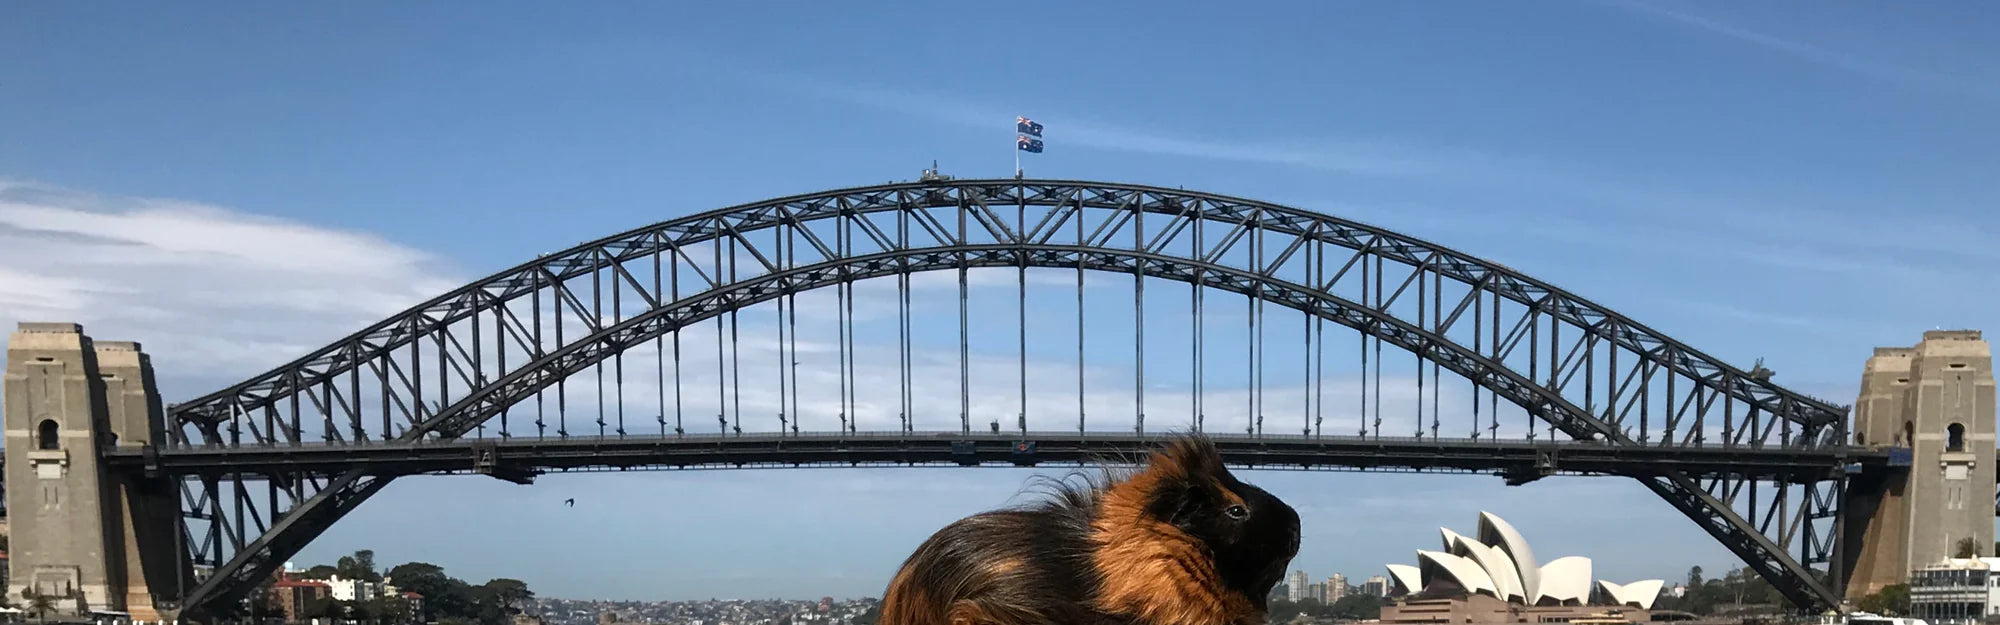 Guinea pig with harbour bridge and opera house in Sydney